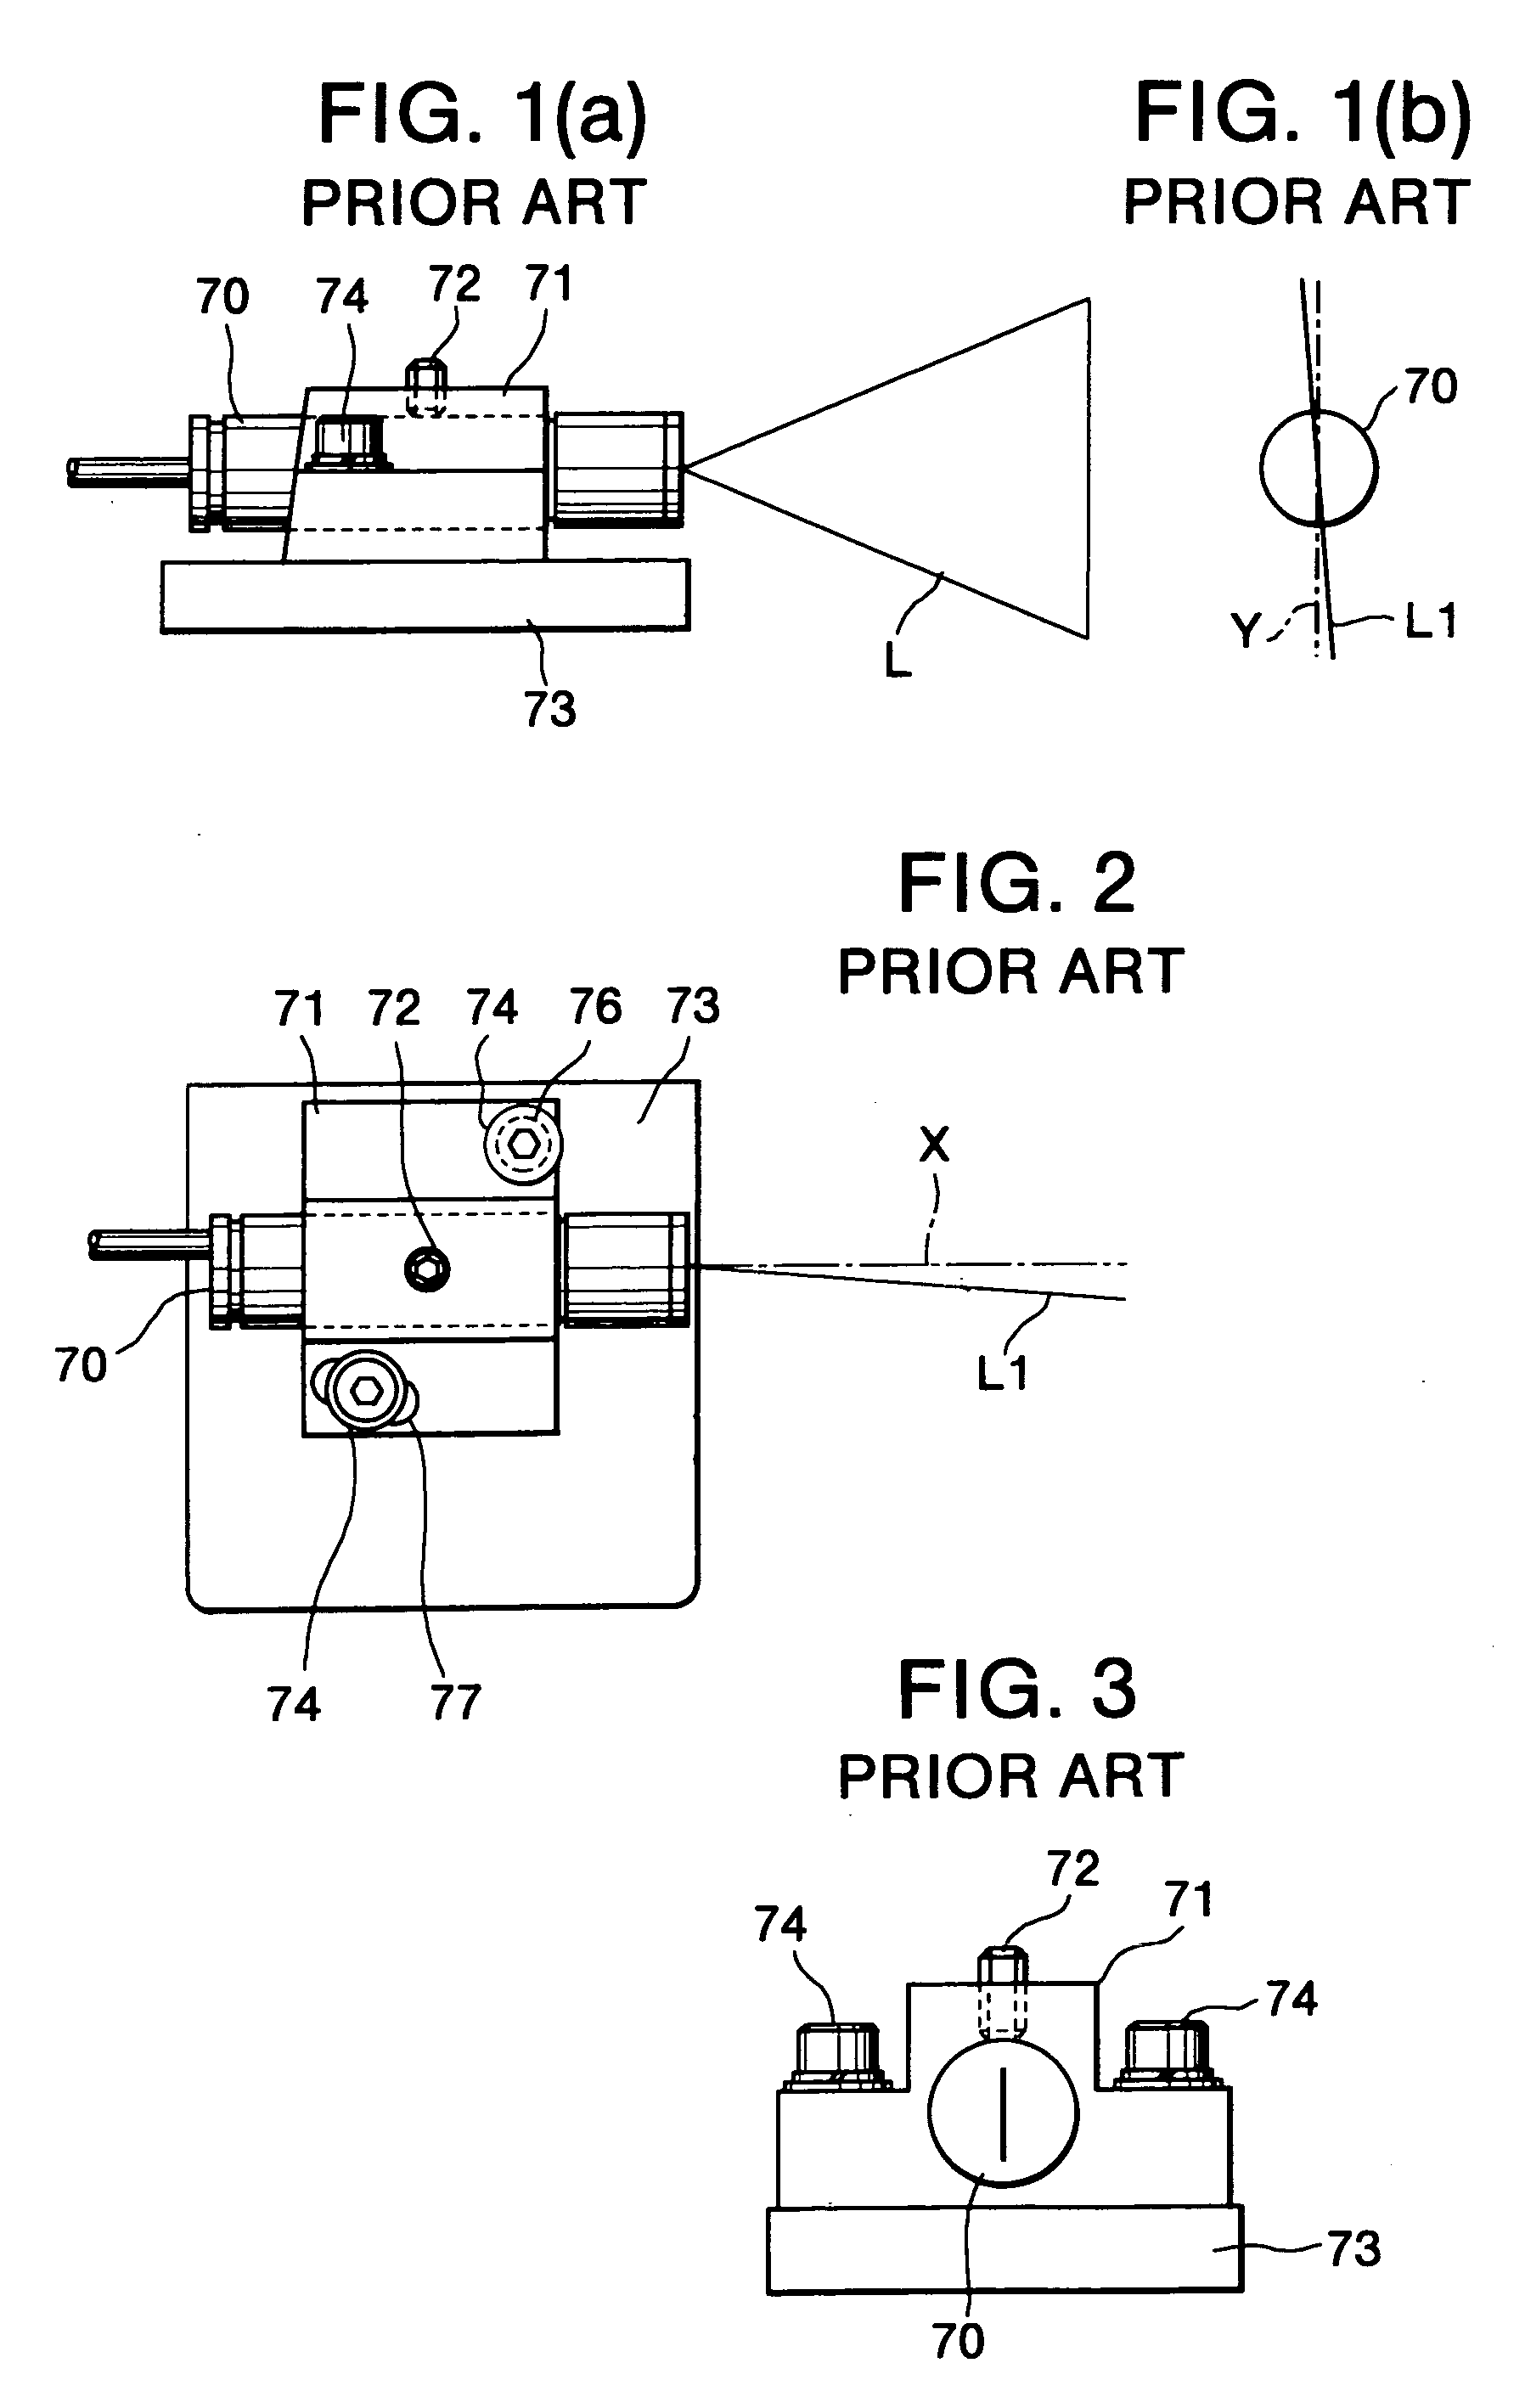 Cutter with laser generator that irradiates cutting position on workpiece to facilitate alignment of blade with cutting position